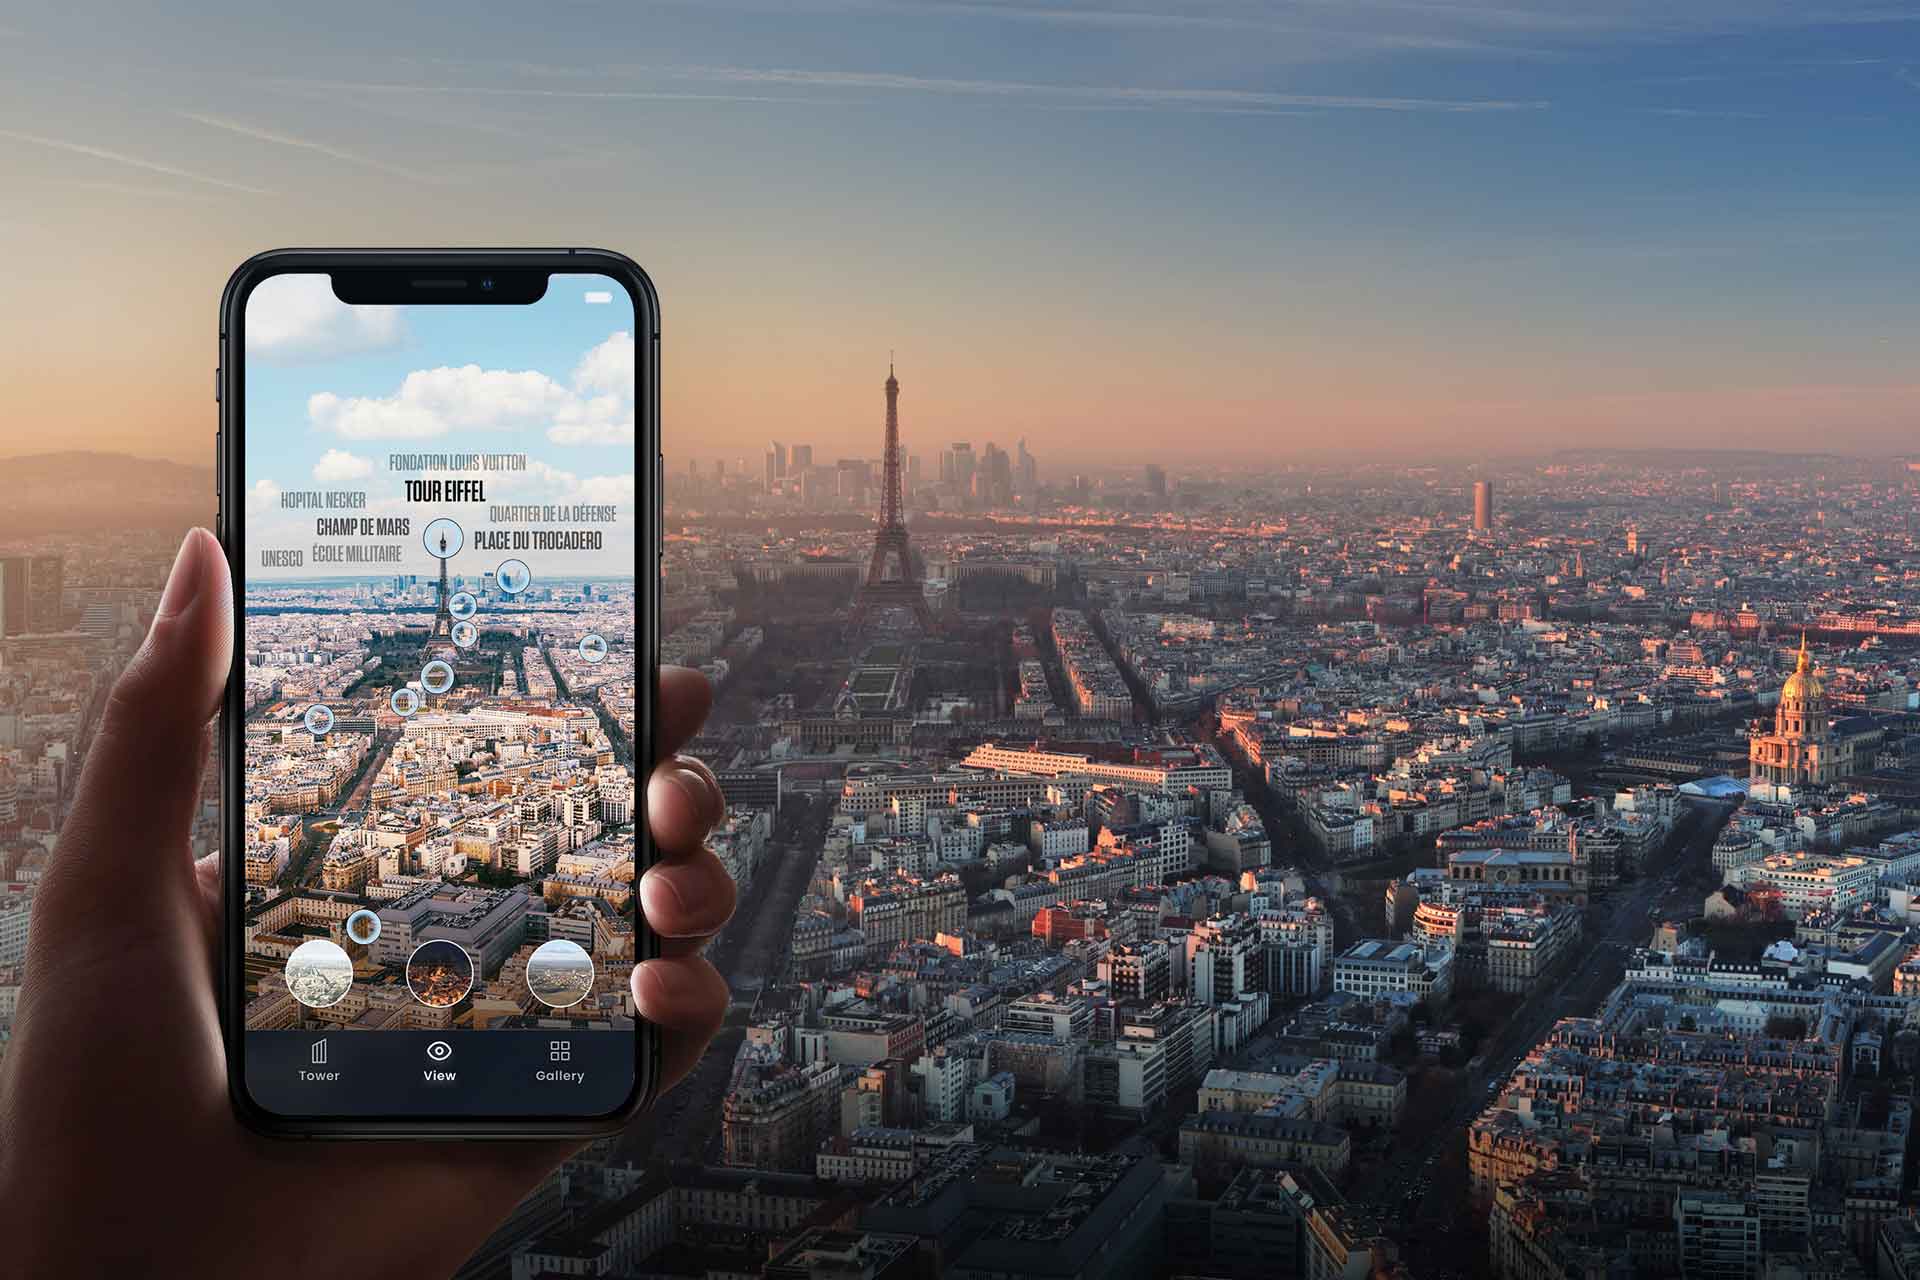 An image of a hand holding a cell phone in front of a skyline view of Paris